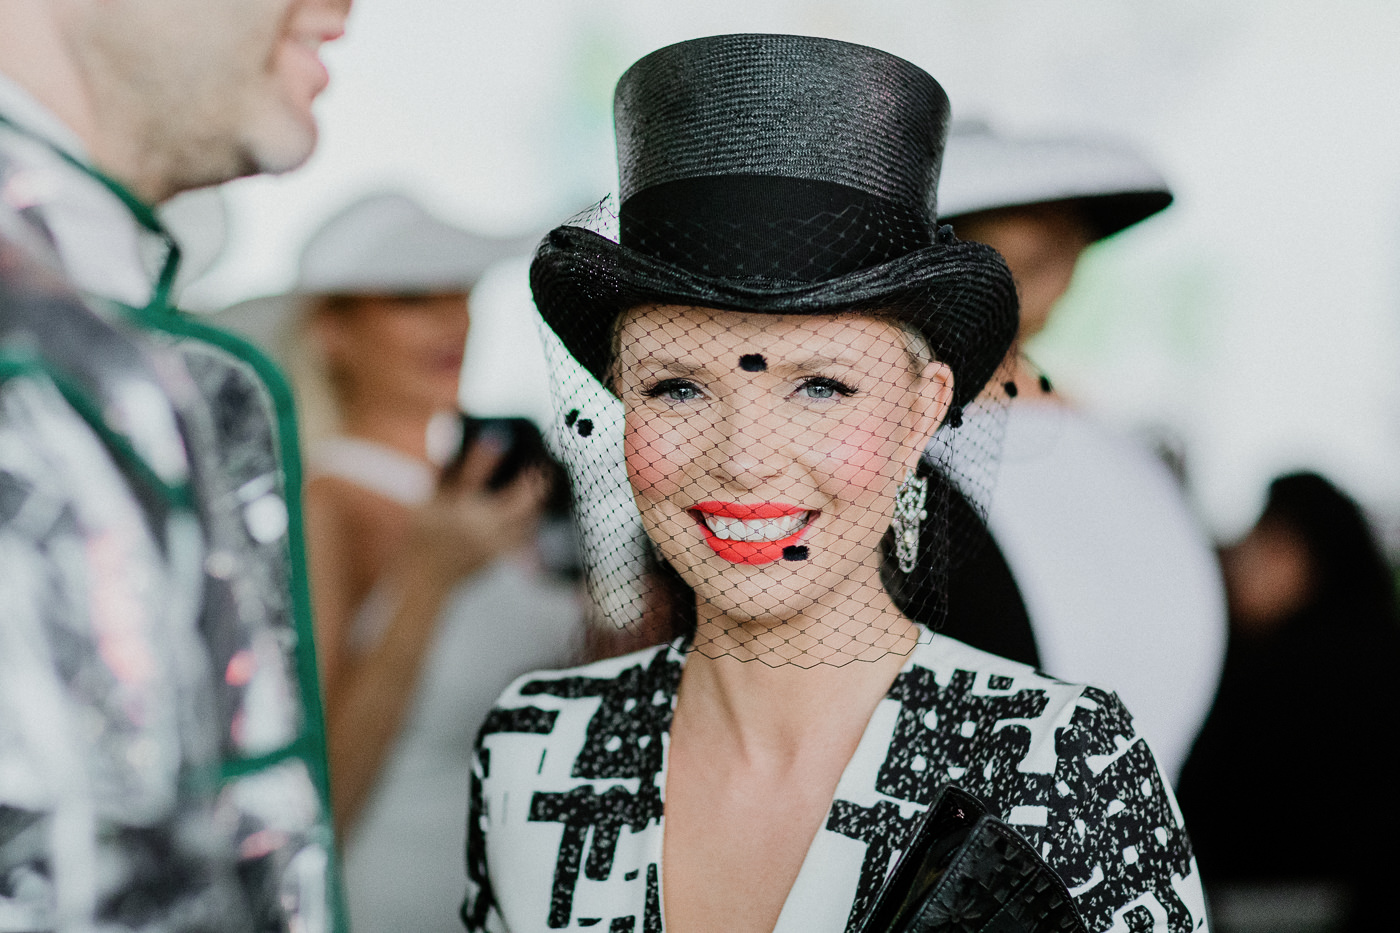 Top hat Trends in Melbourne - at Derby Day 